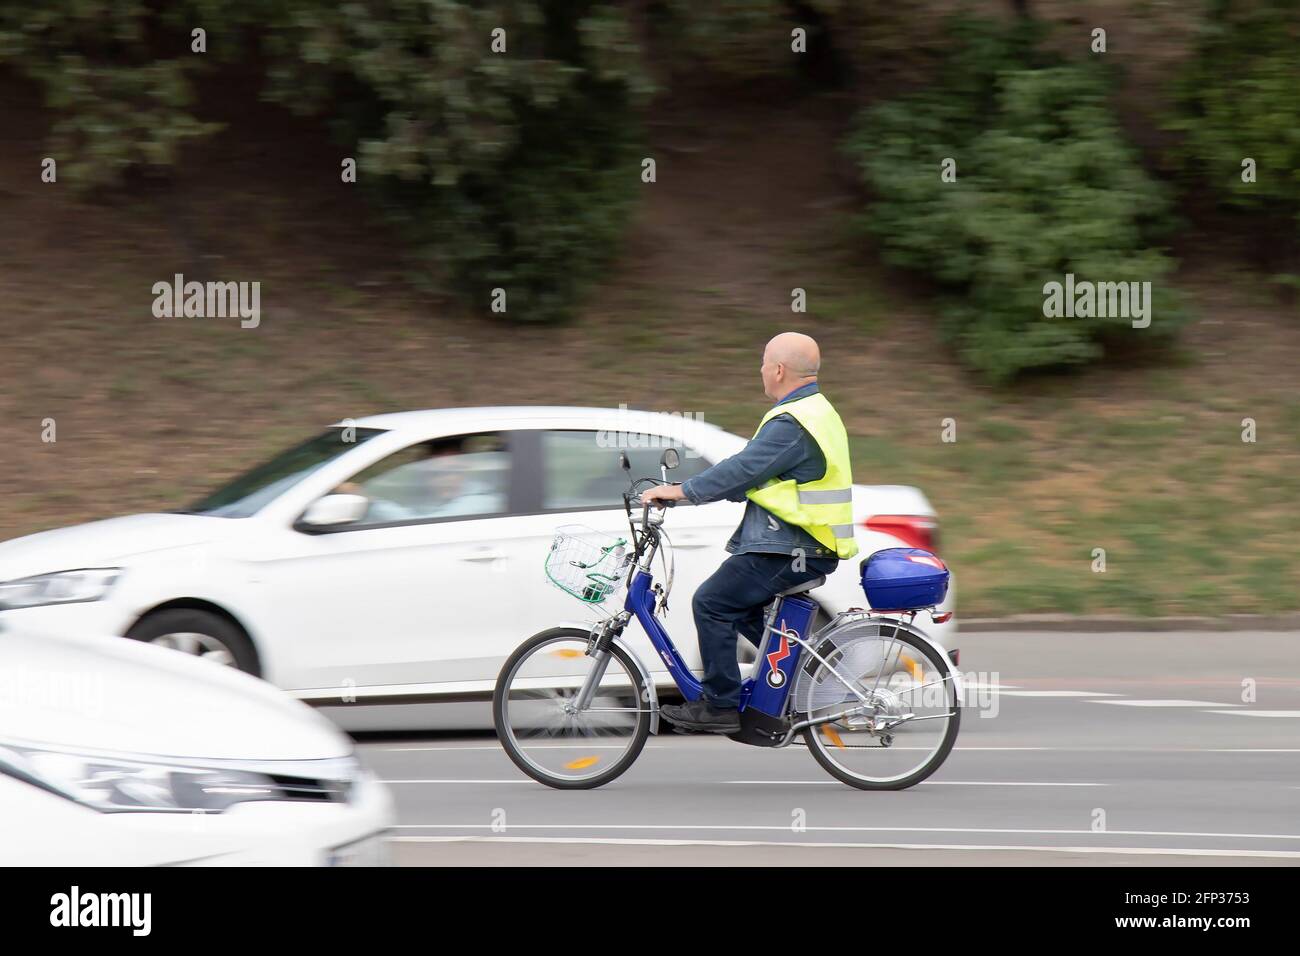 Belgrade, Serbia - May 14, 2021: One senior man wearing fluorescent vest  riding an electric bike in city street traffic by the park Stock Photo